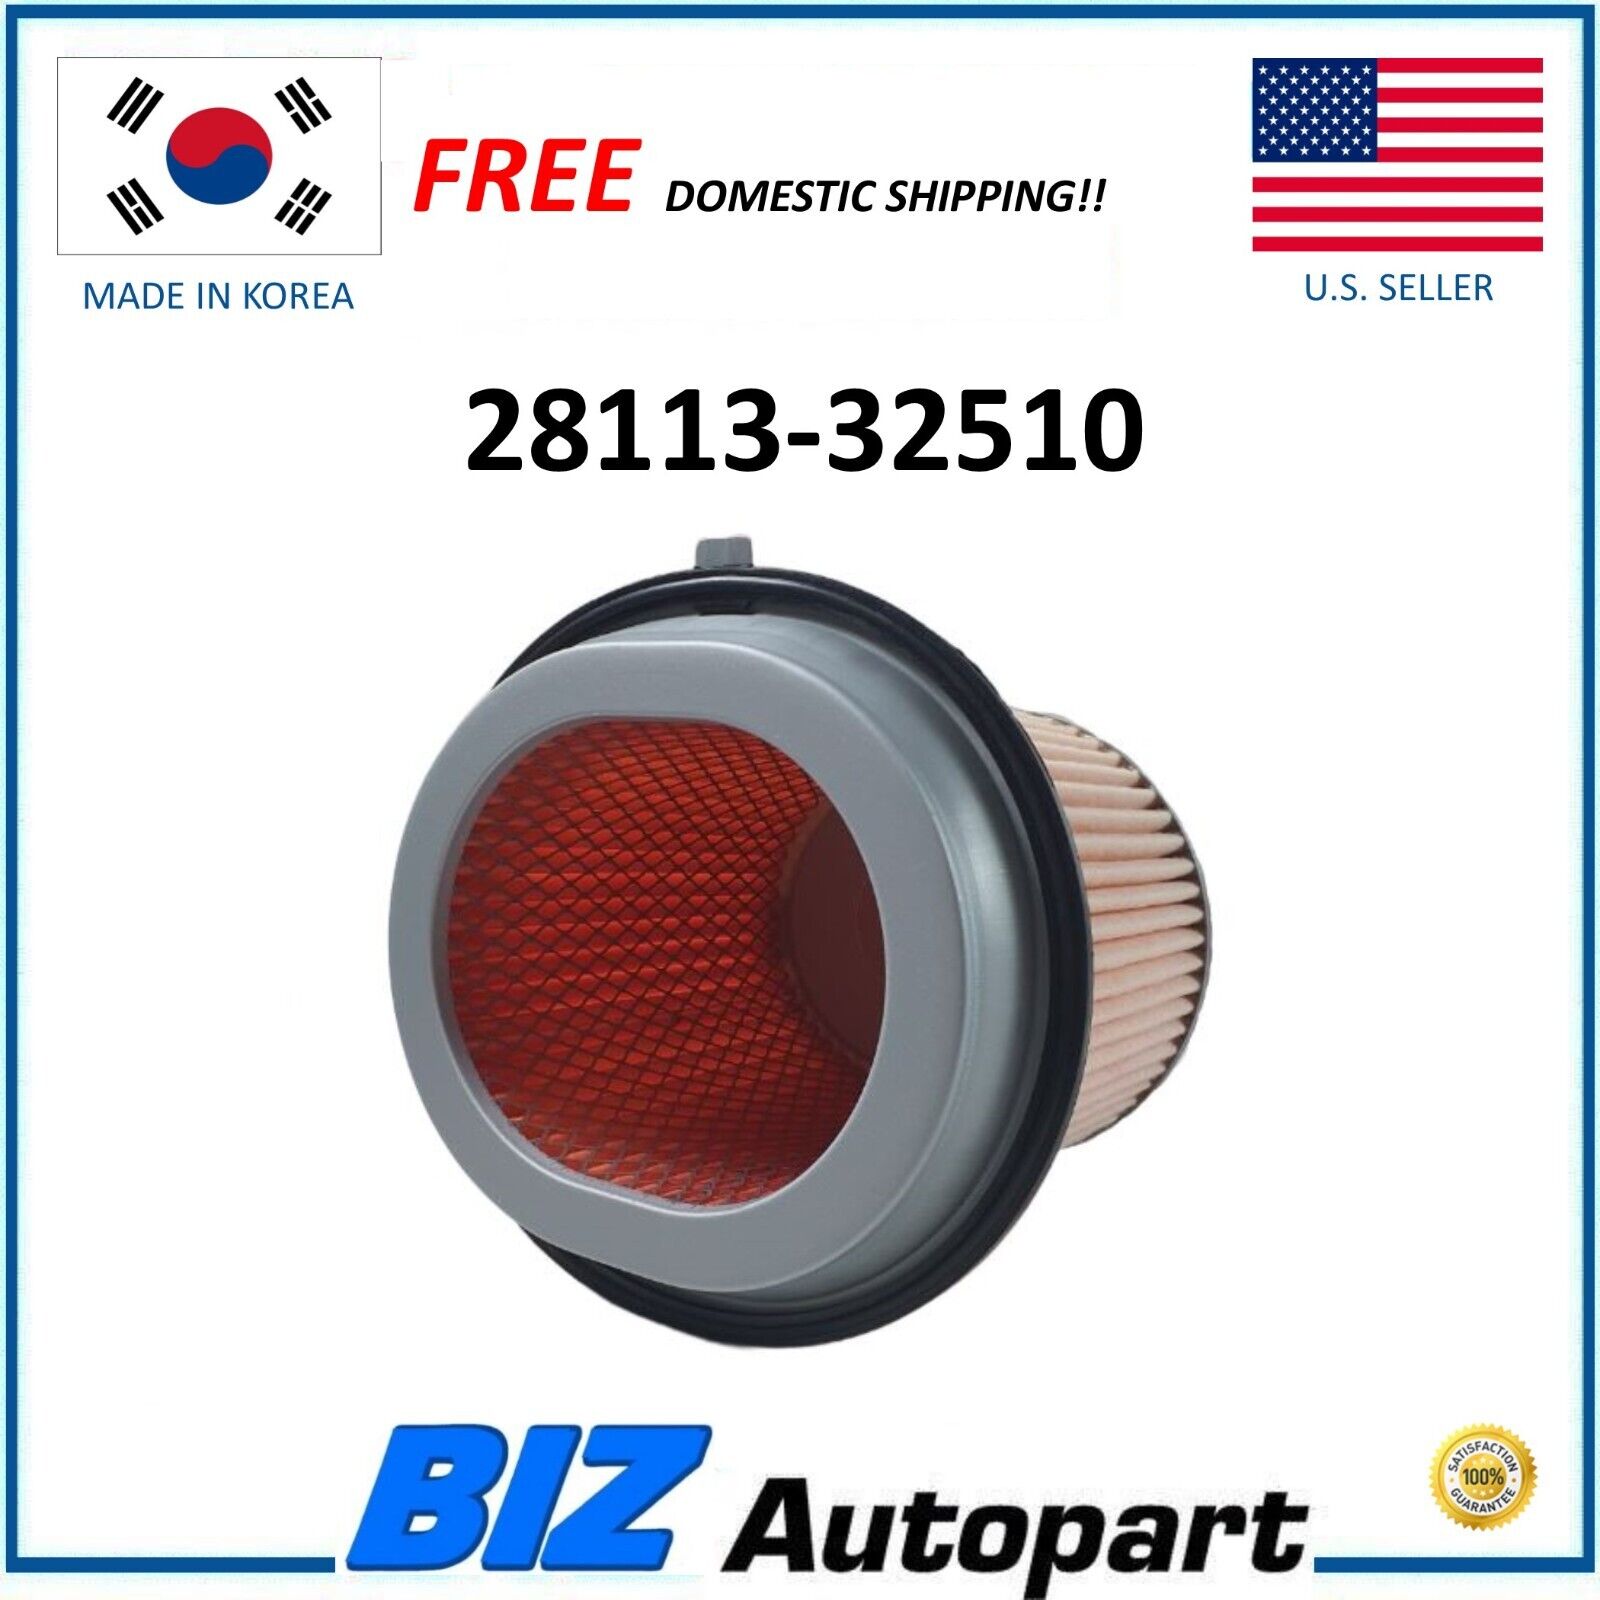 NEW✅AIR FILTER CLEANER FOR HYUNDAI 1989-1998 OE#28113-32510